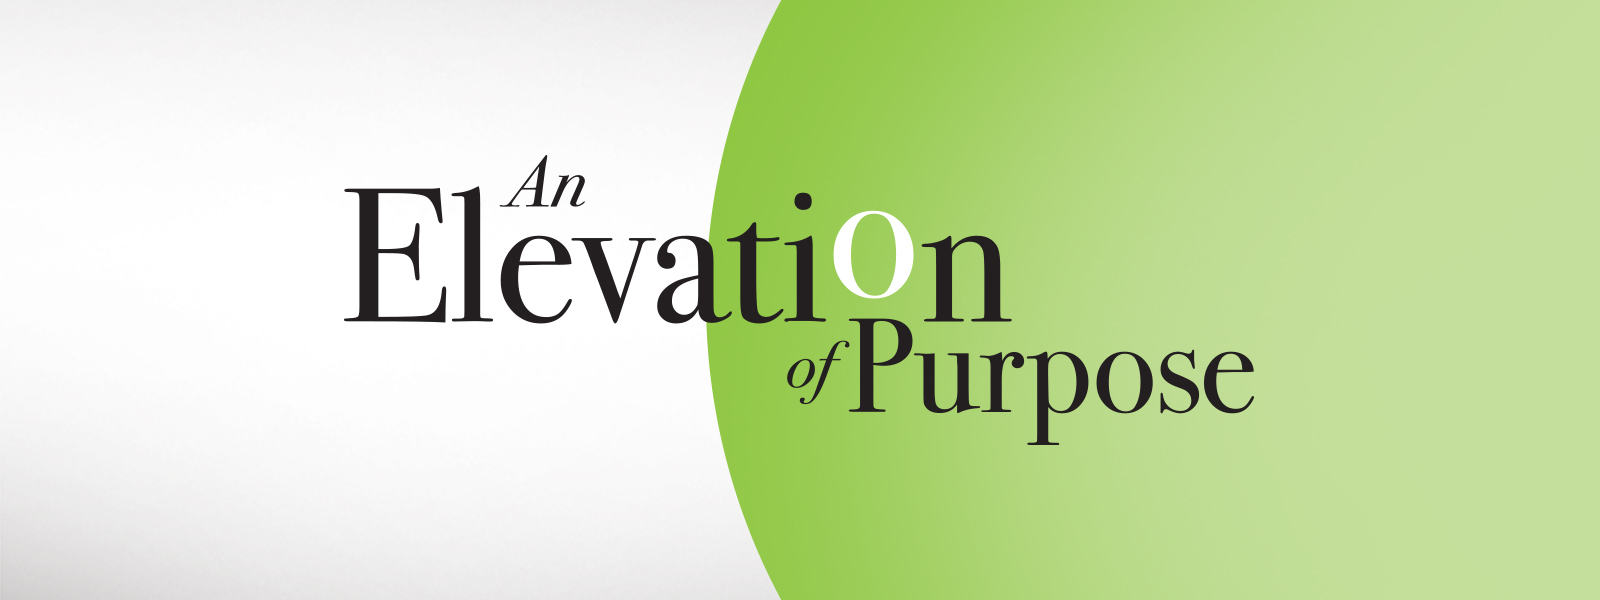 An Elevation of Purpose